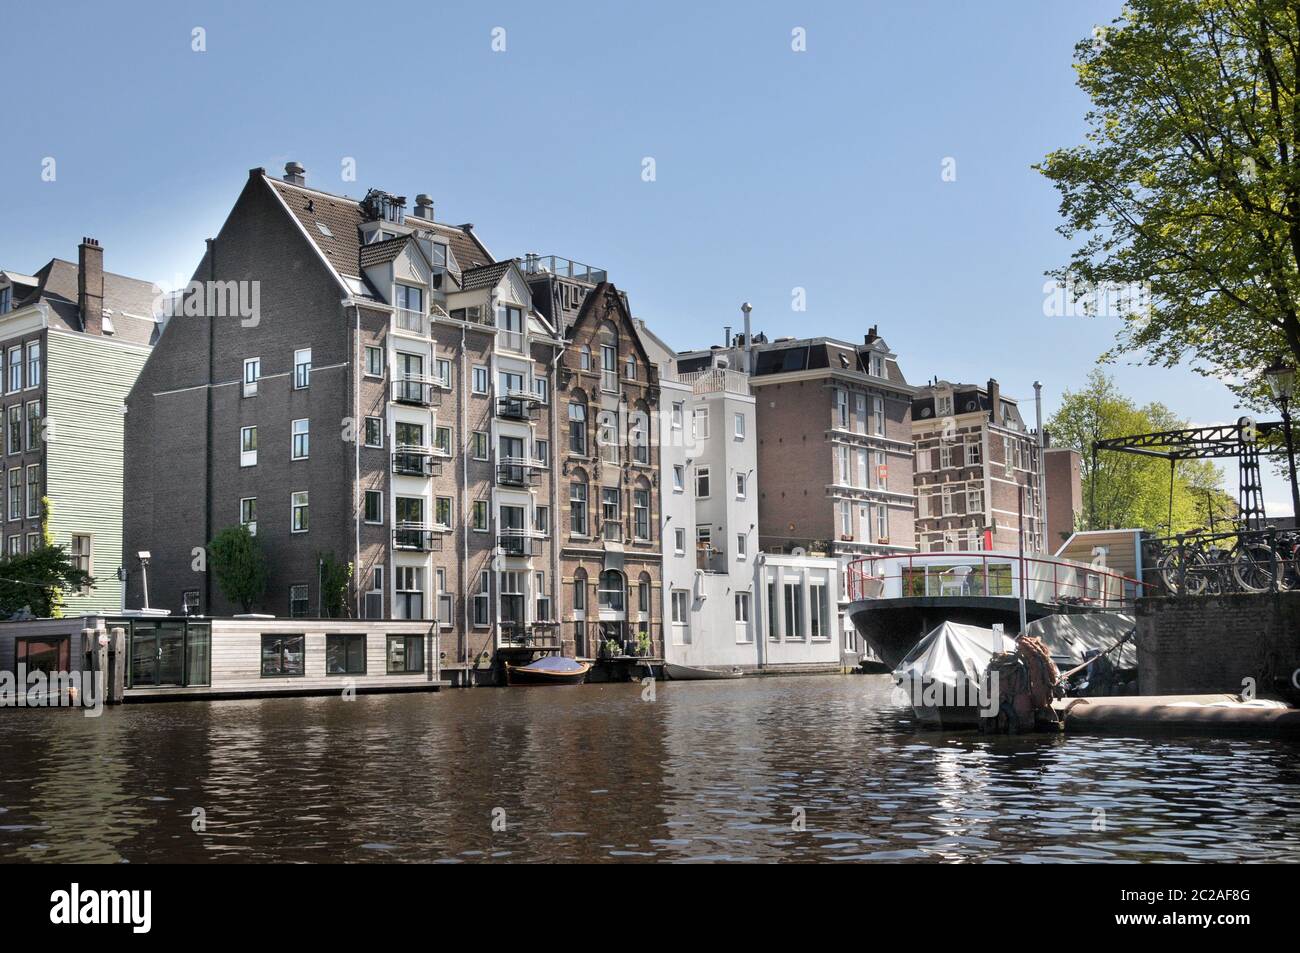 Gracht (canal) in Amsterdam Stock Photo